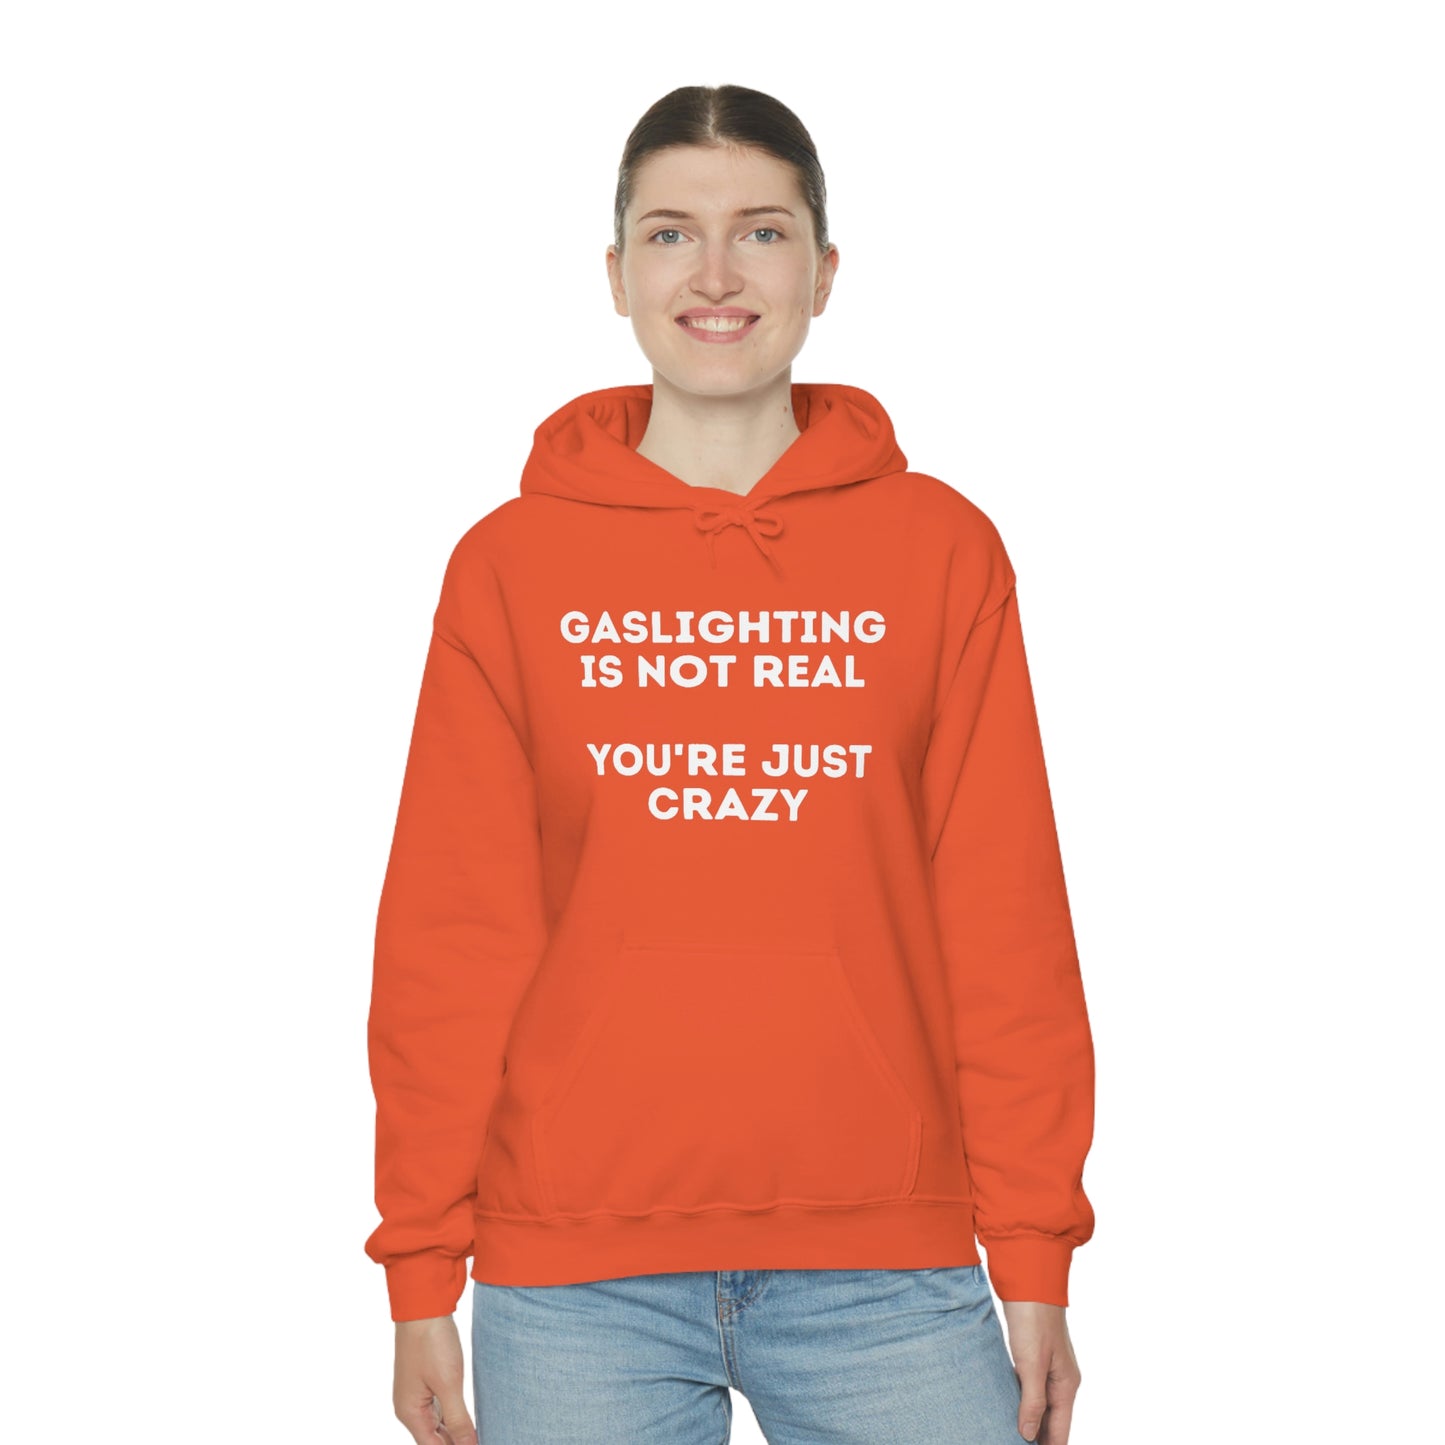 Gaslighting isn't real You're just crazy - Unisex Heavy Blend™ Hooded Sweatshirt - ALL COLORS